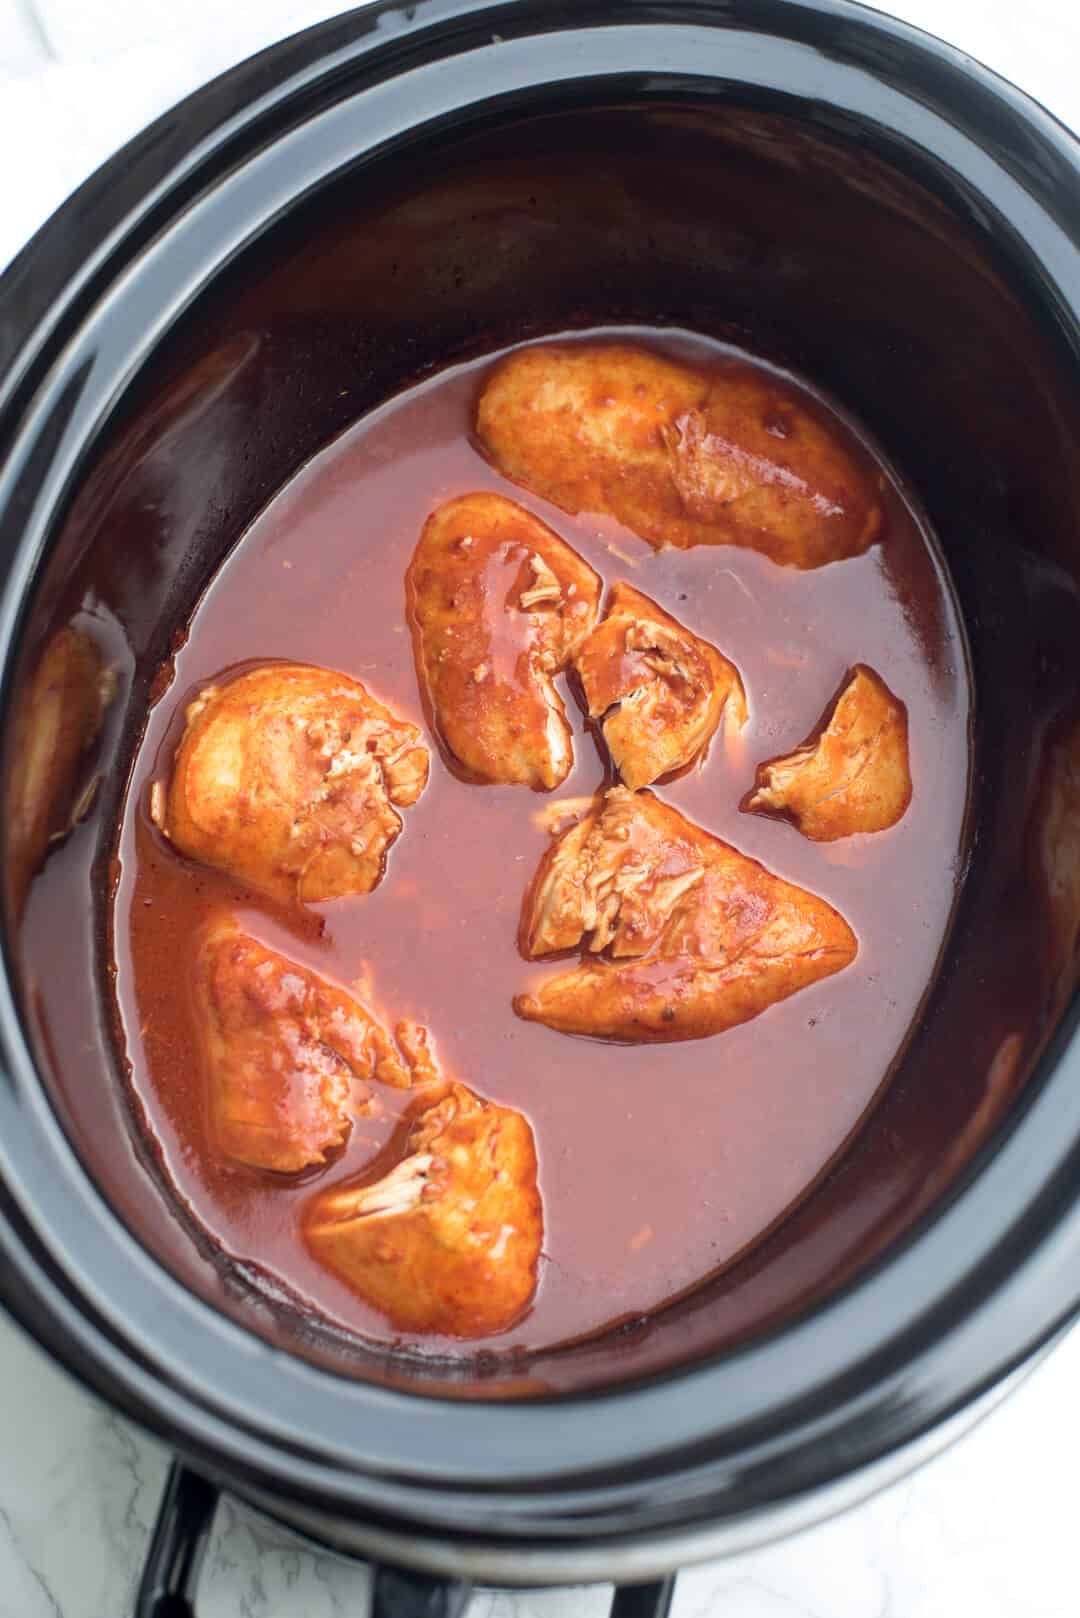 Cooked chicken in sauce in a slow cooker.